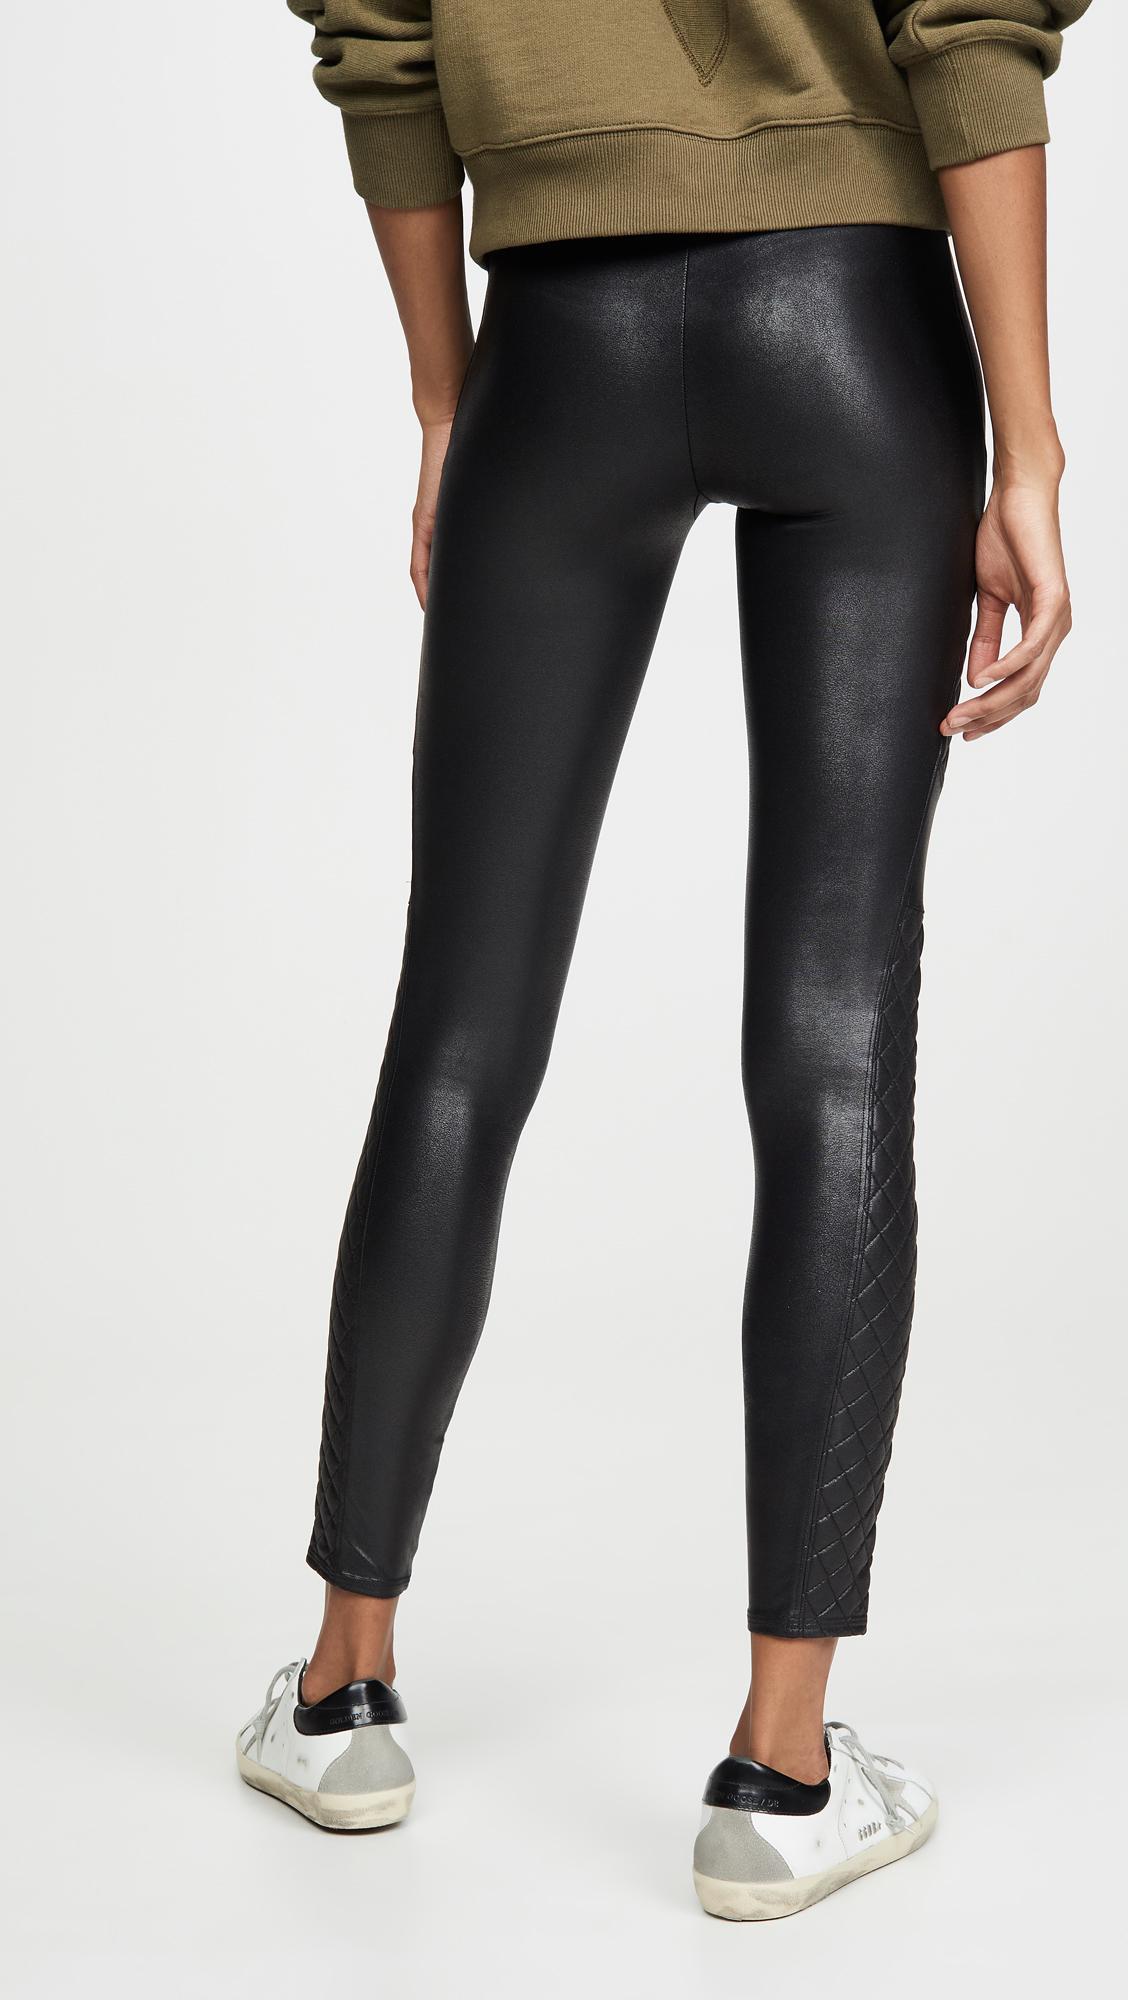 Spanx Quilted Faux Leather Leggings in Black - Lyst